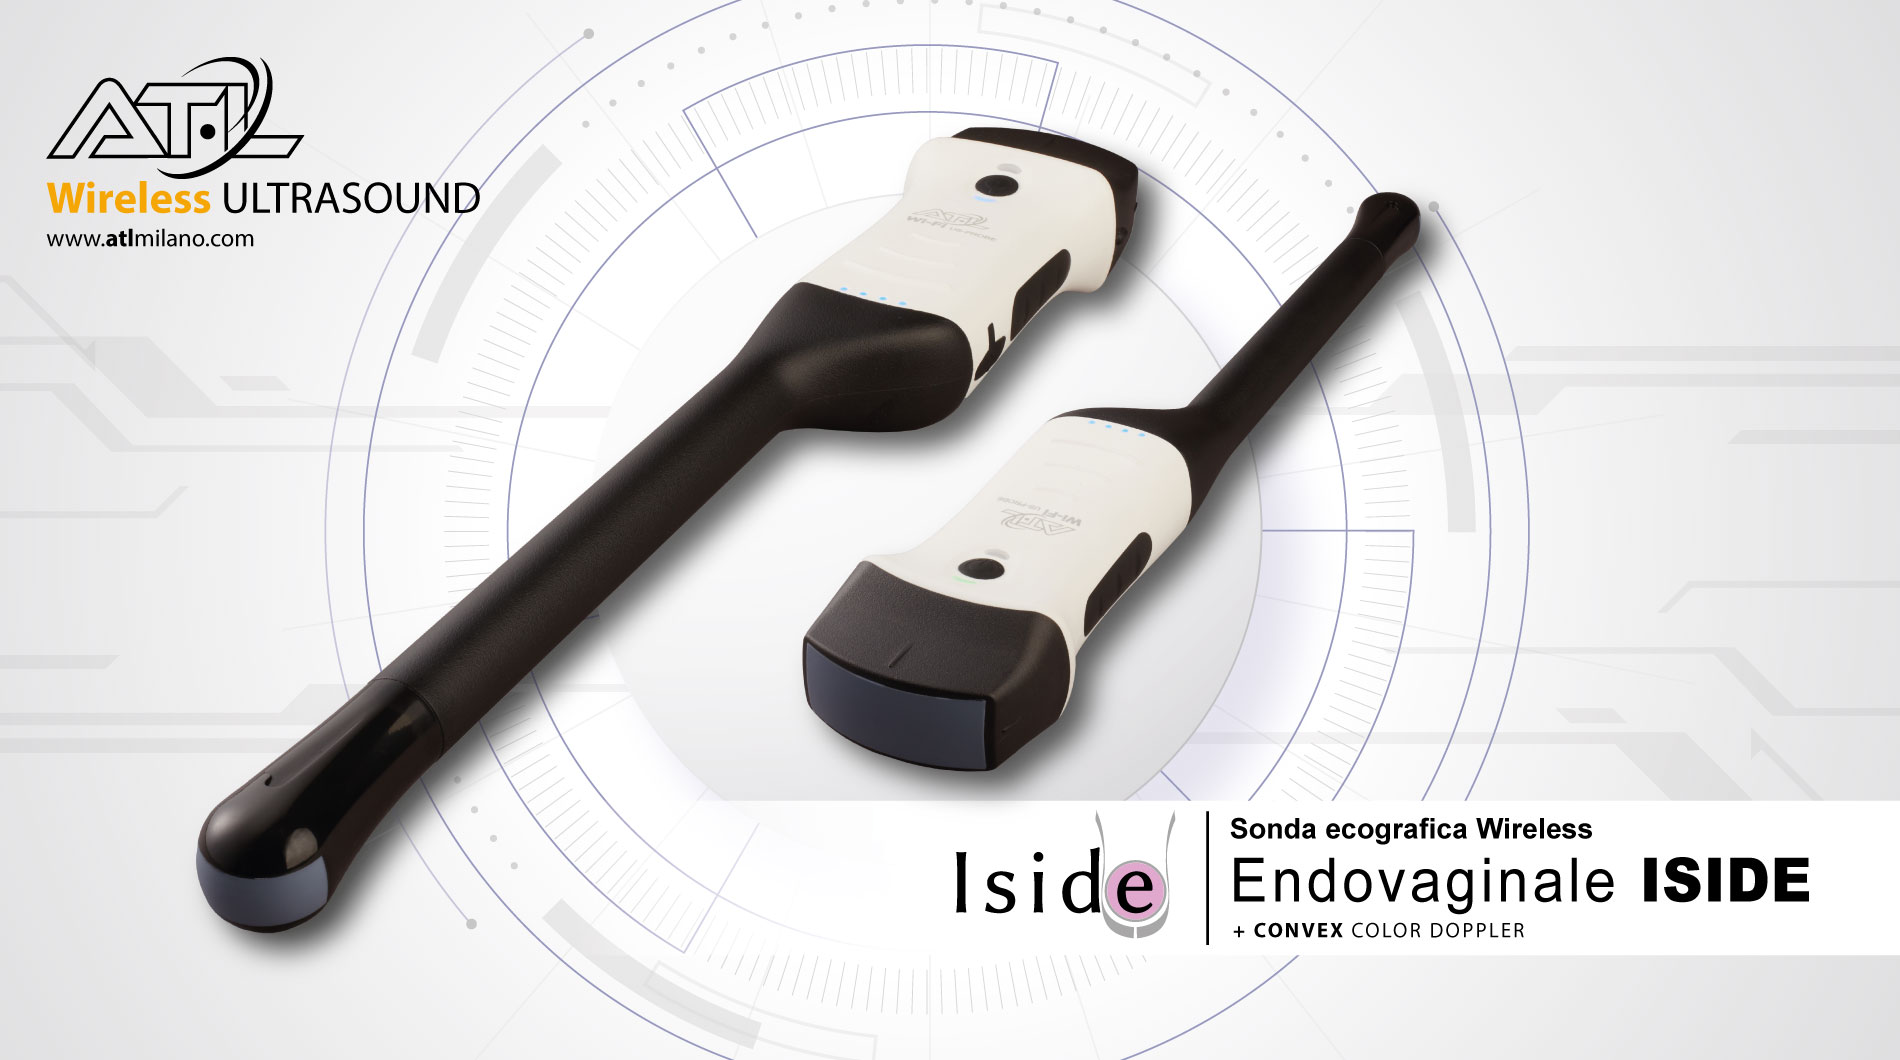 ISIDE -Sonda ecografica Wireless Endovaginale + Convex +Phased Aarray - Color + Power + Doppler PW